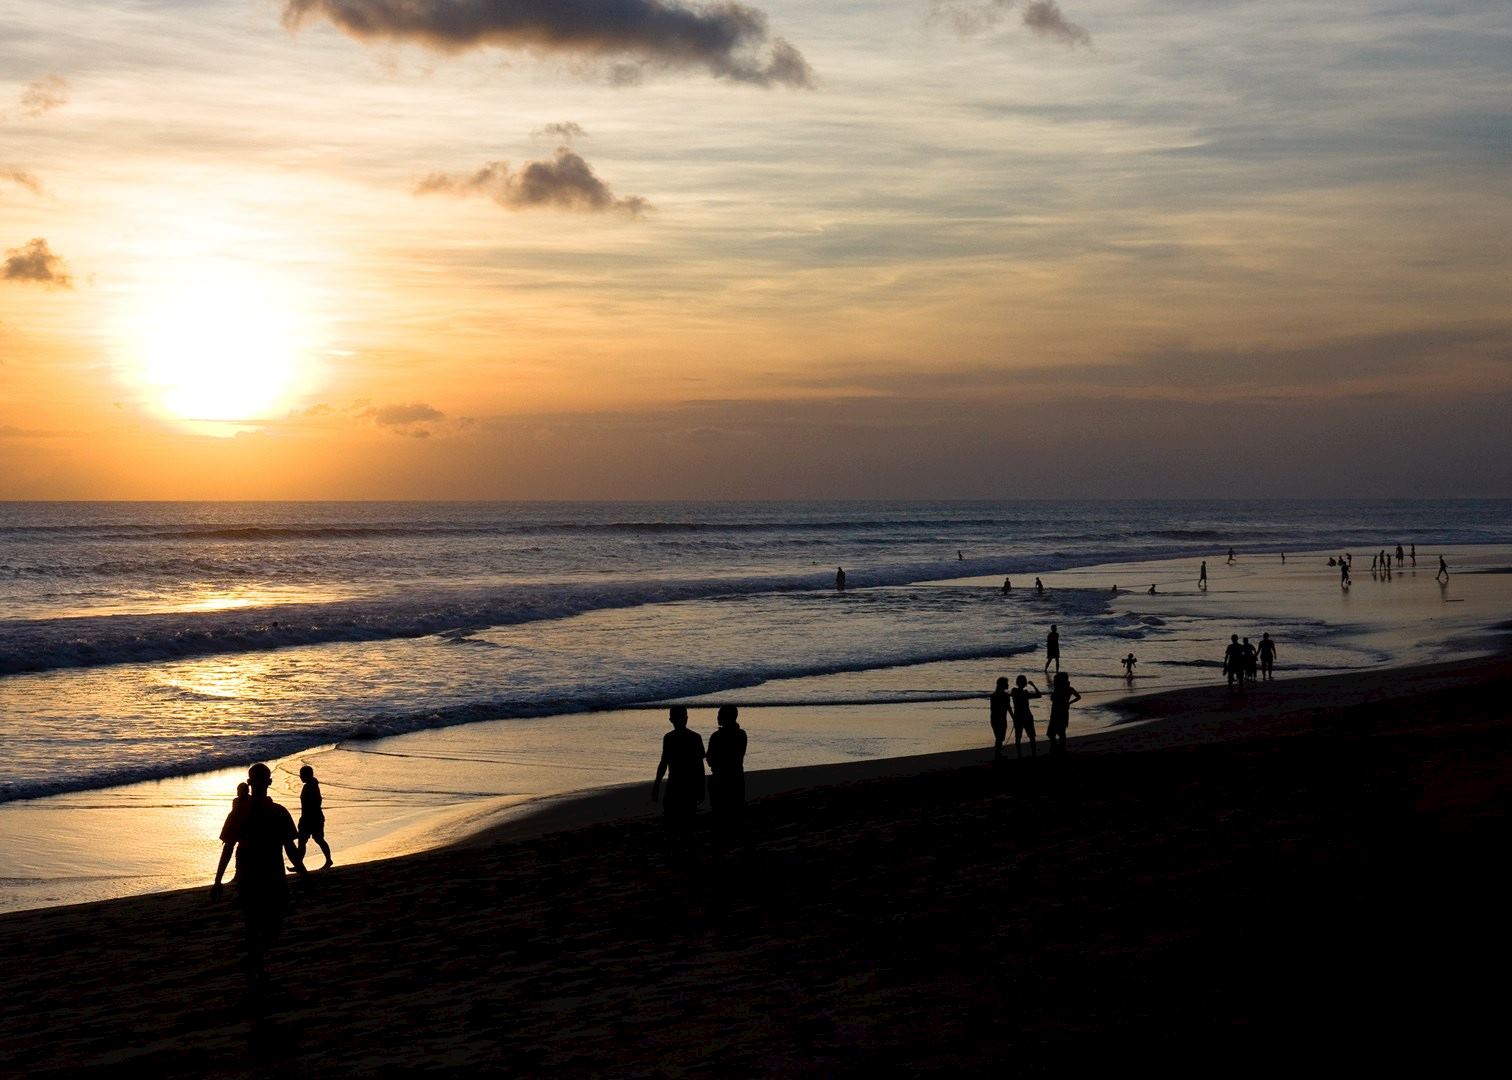 Visit Seminyak on a trip to Indonesia | Audley Travel